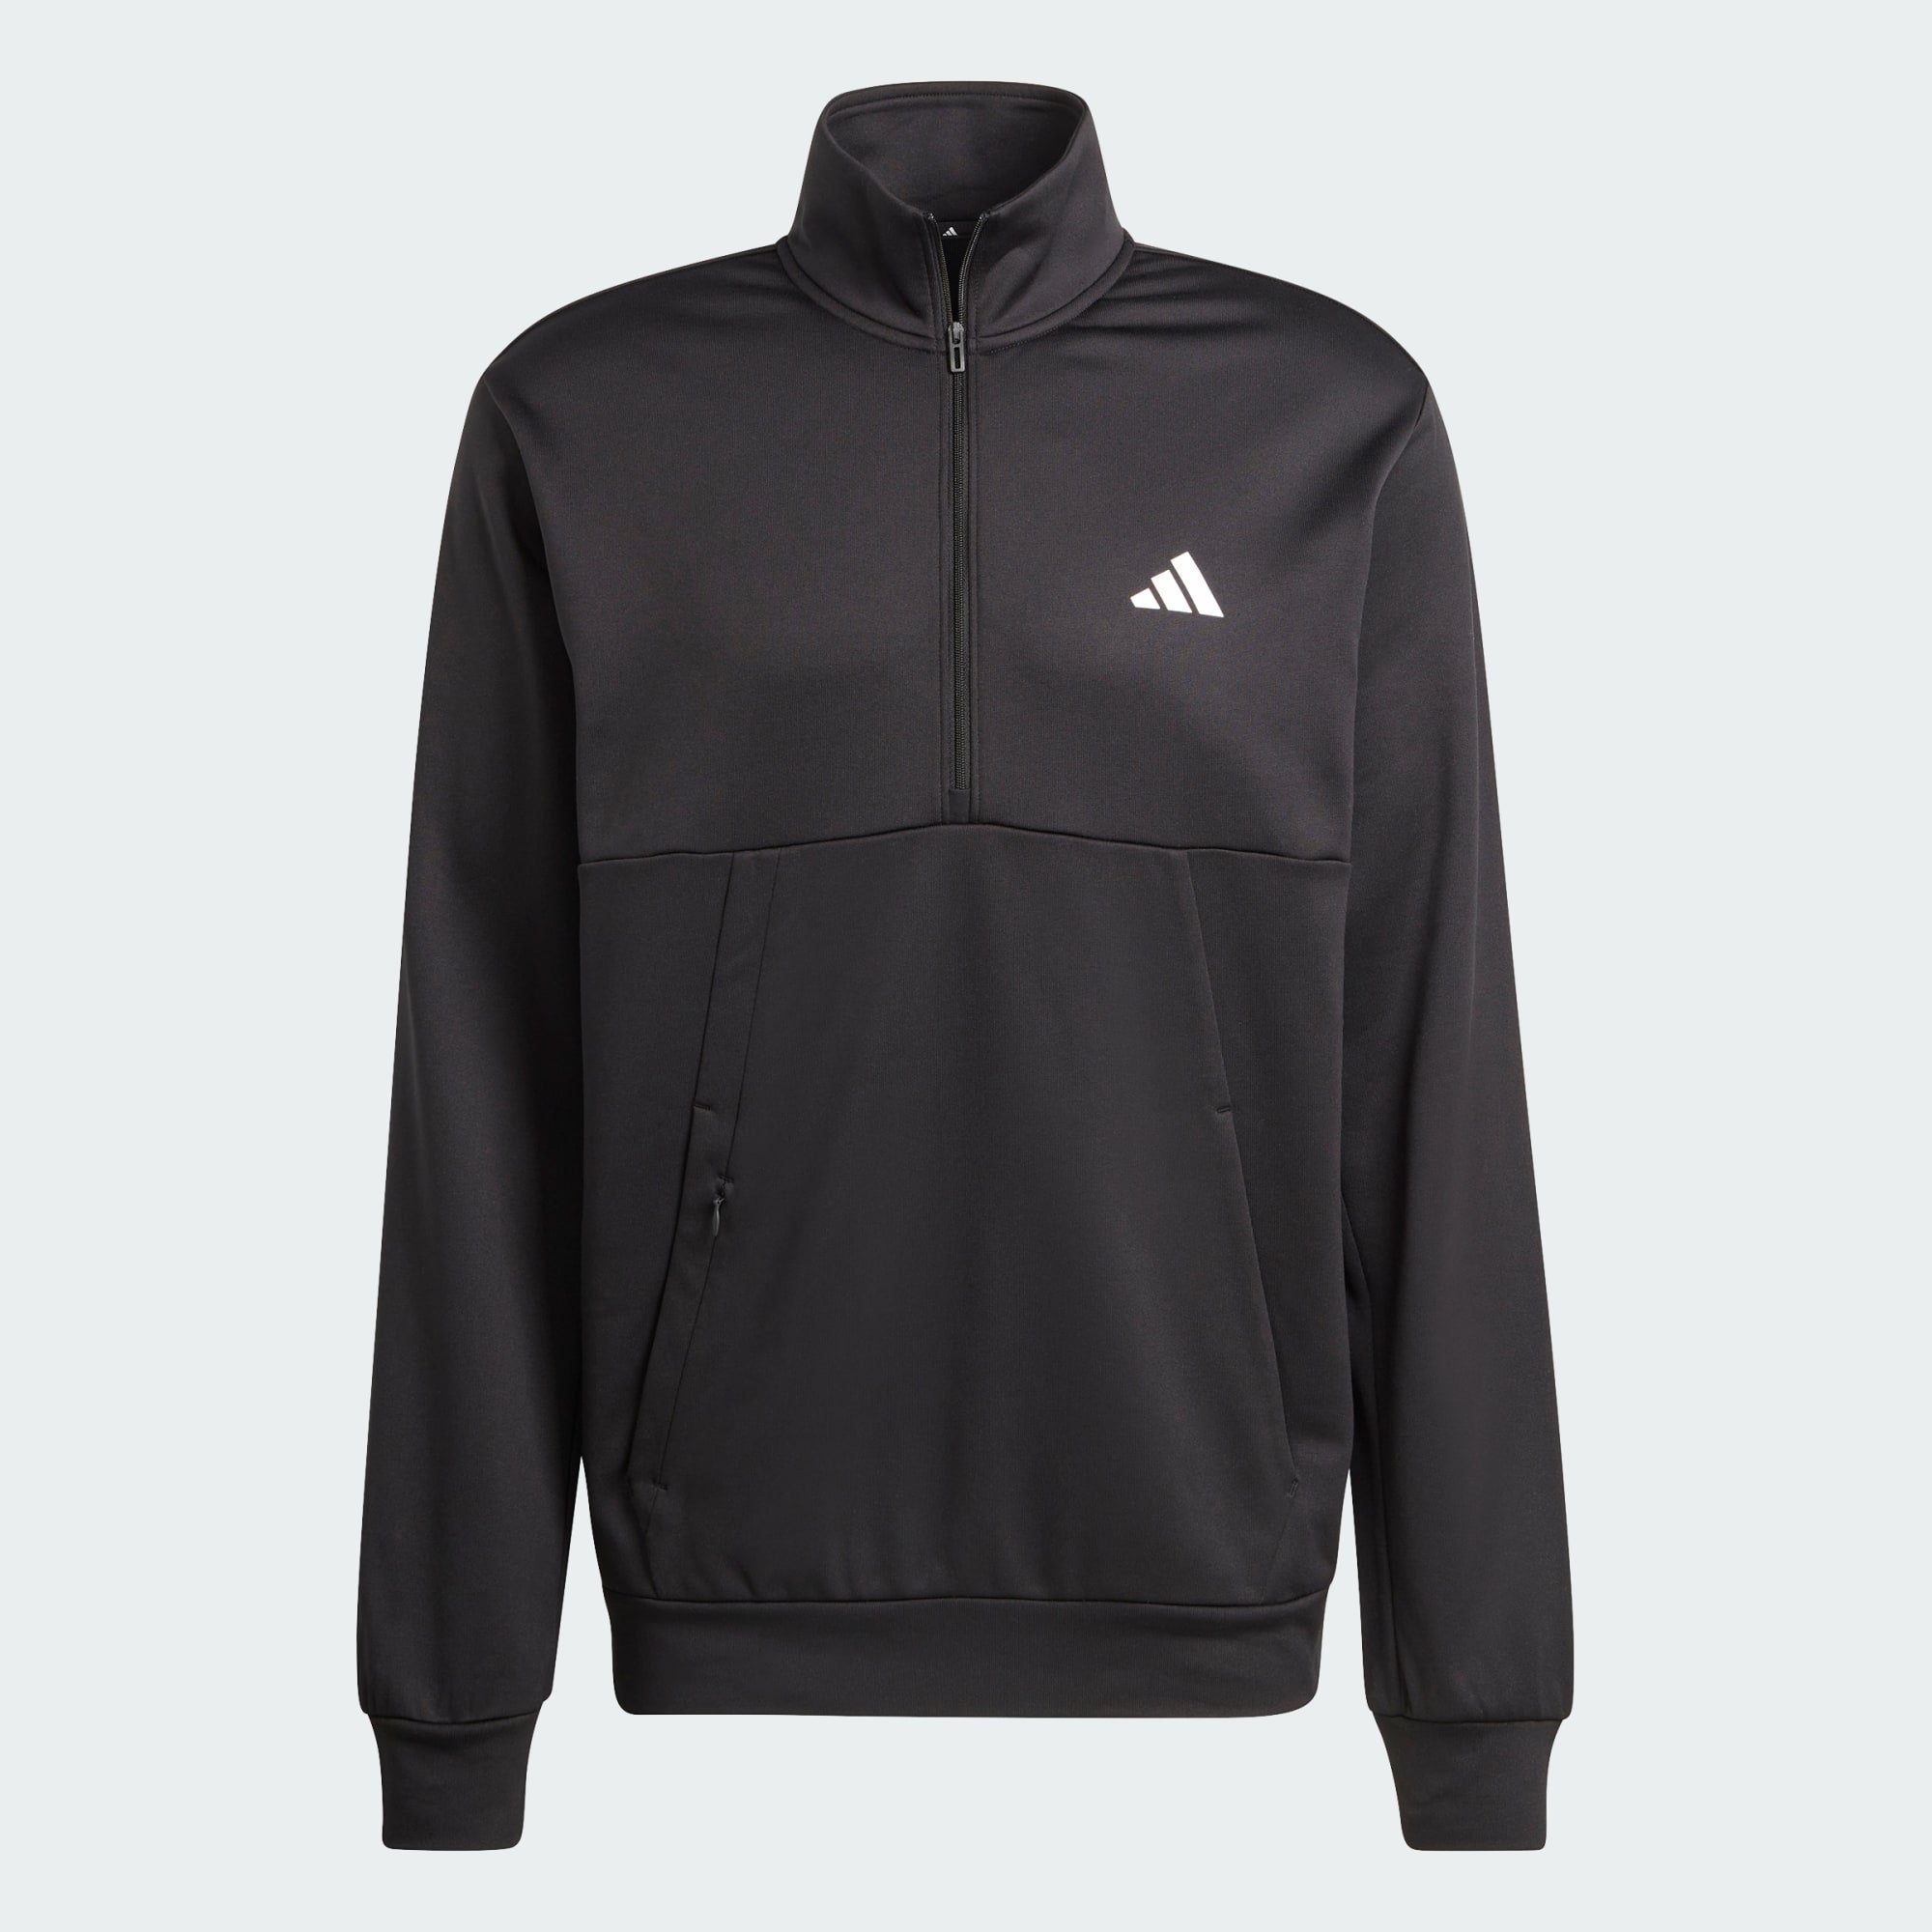 ZIP Funktionsshirt OBERTEIL 1/4 LOGO GO SMALL Performance adidas TRAINING AND GAME